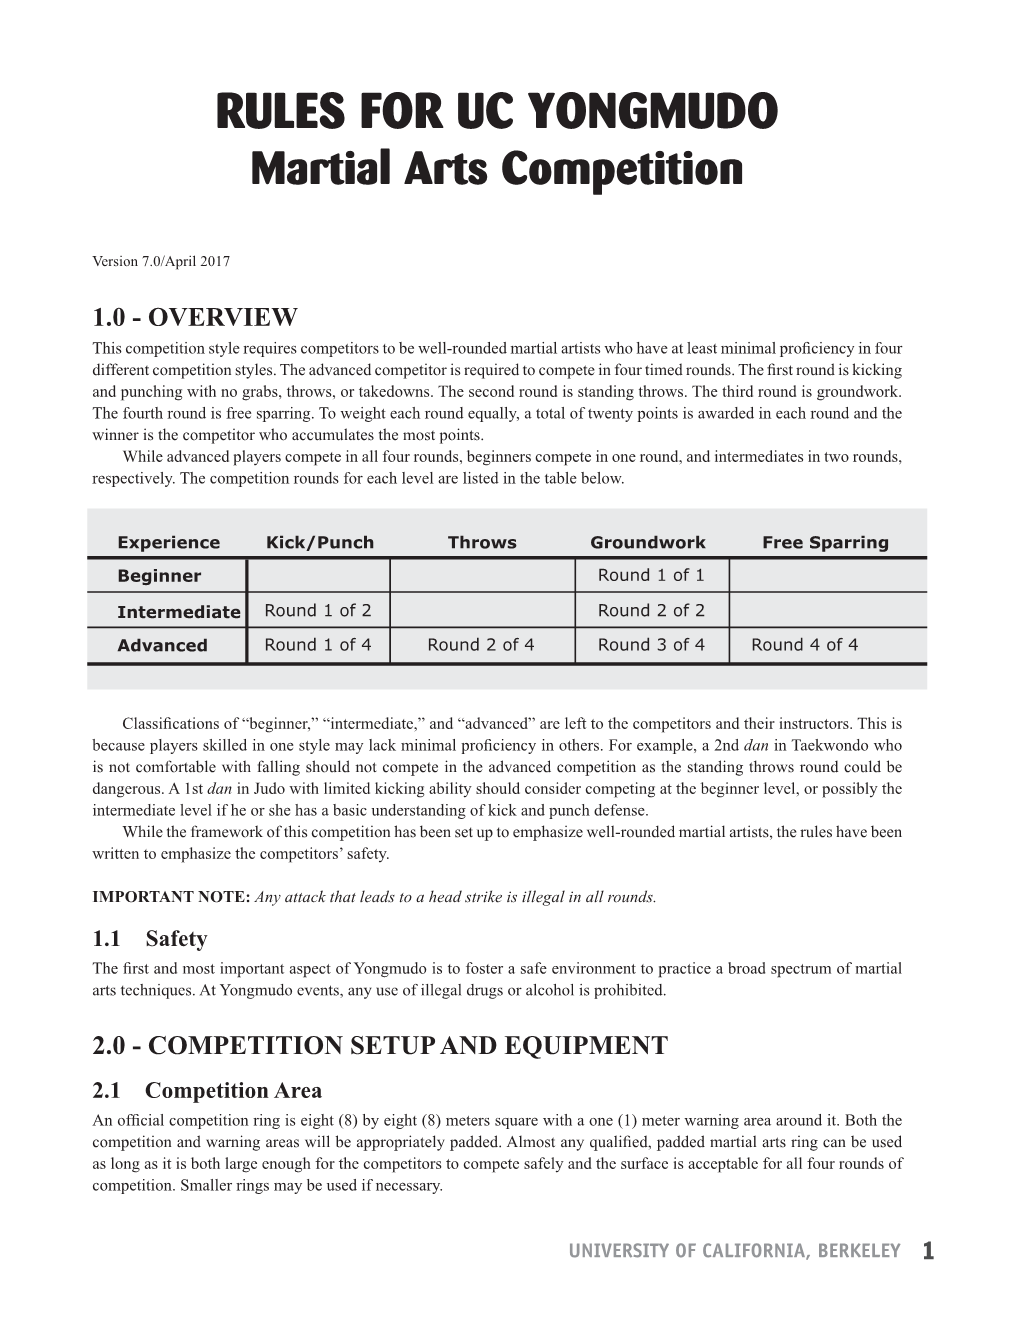 Rules for Uc Yongmudo Martial Arts Competition